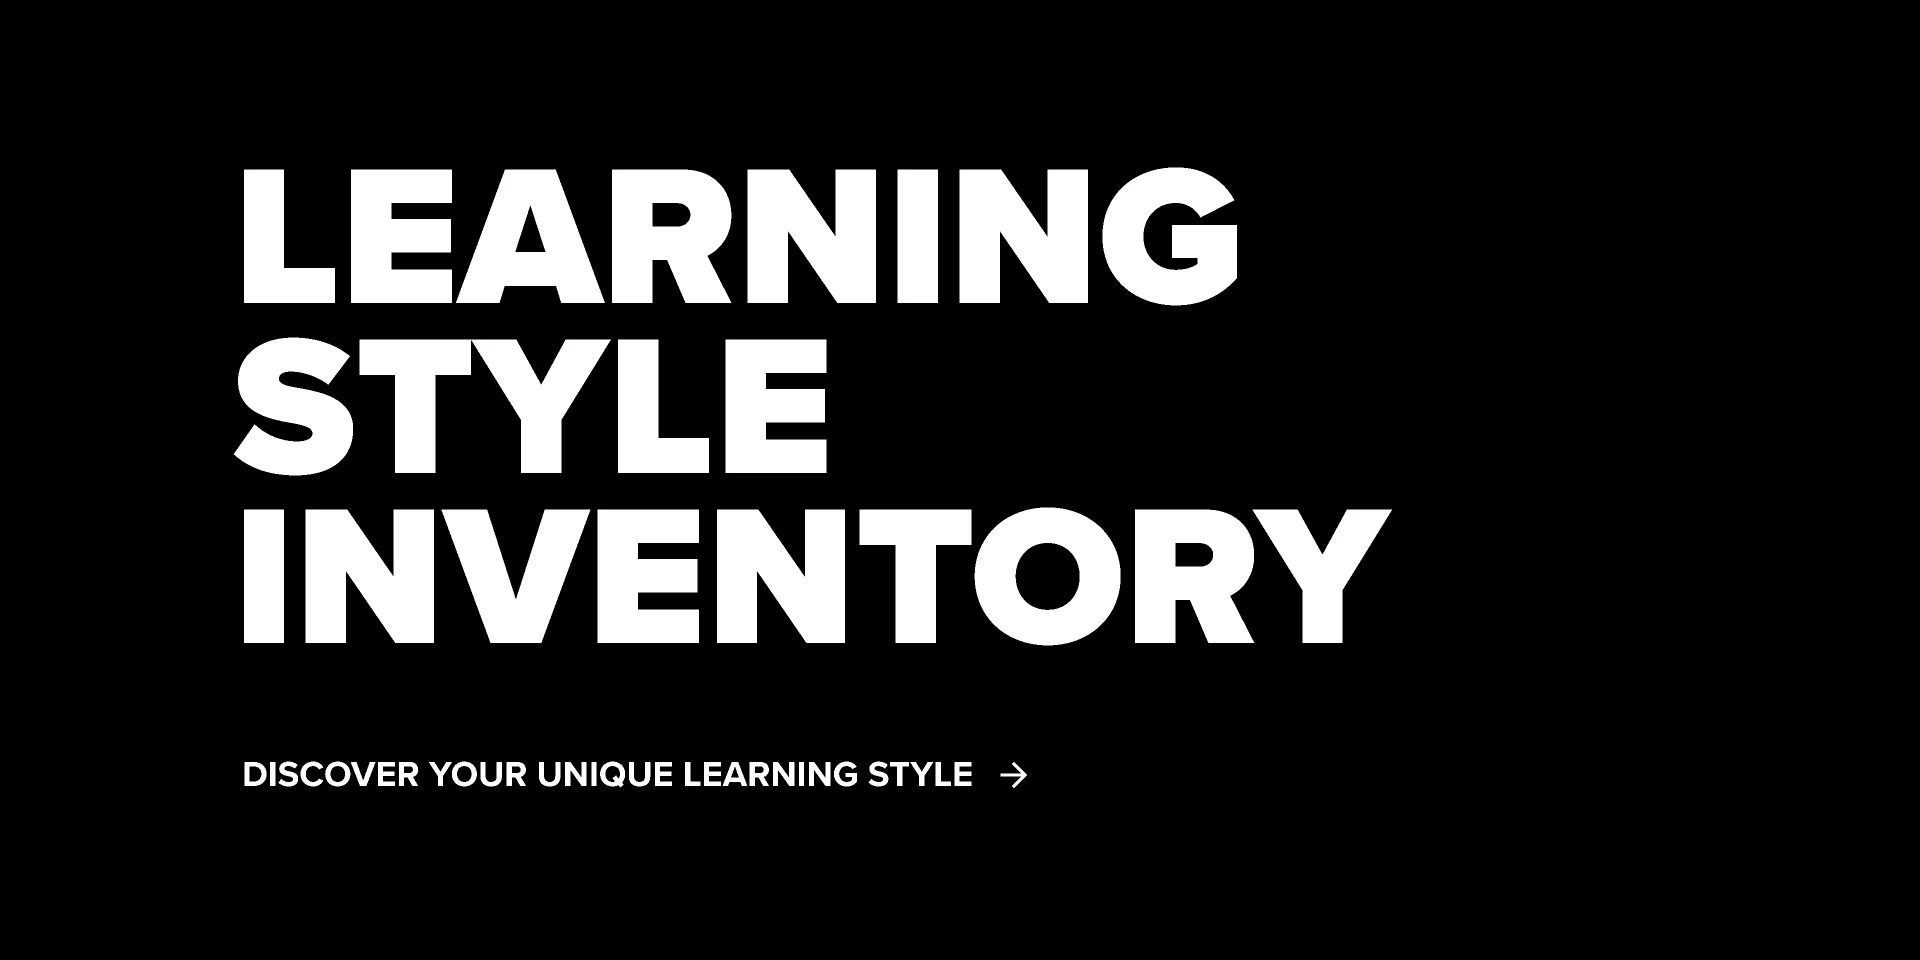 Learning Style Inventory for Figma and Adobe XD